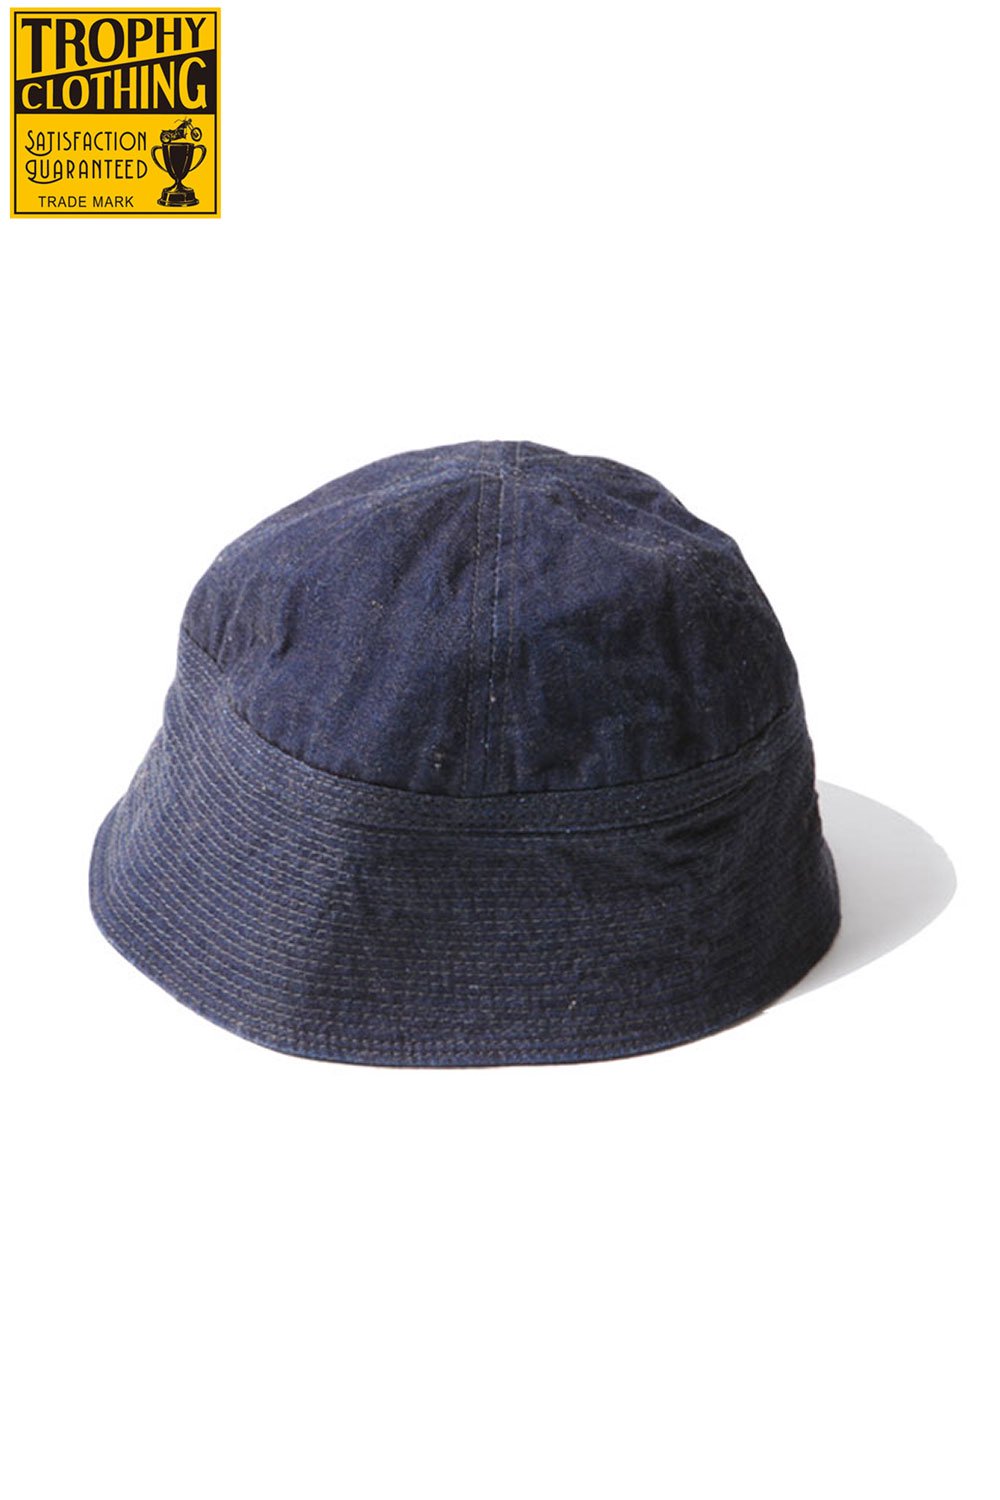 TROPHY CLOTHING(トロフィークロージング) セーラーハット Sailor Hat